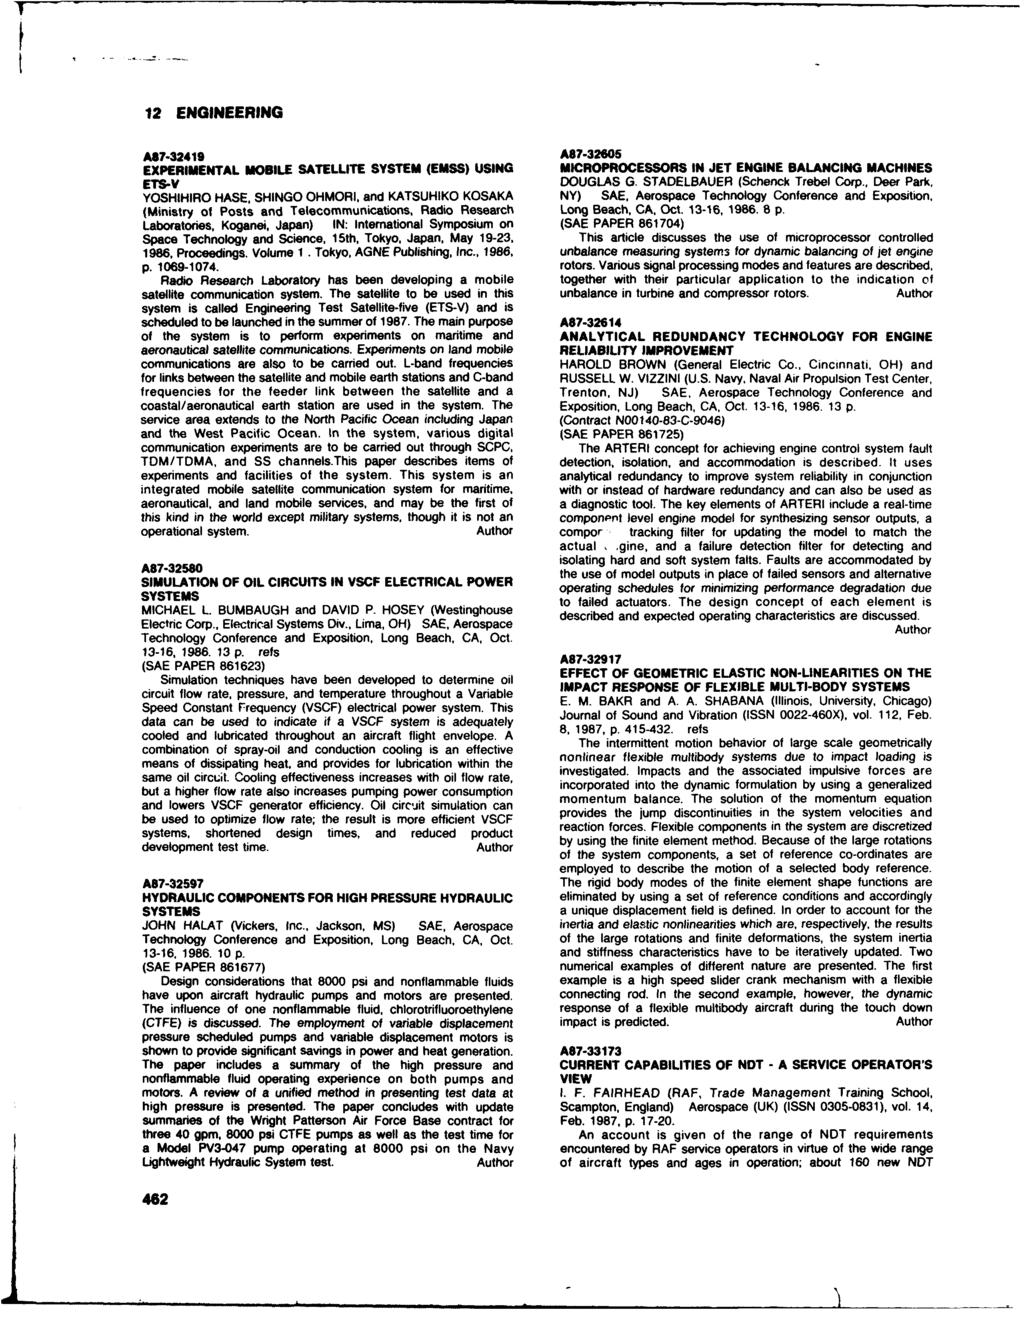 12 ENGINEERING A87-32419 A87-32605 EXPERIMENTAL MOBILE SATELLITE SYSTEM (EMSS) USING MICROPROCESSORS IN JET ENGINE BALANCING MACHINES ETS-V DOUGLAS G. STADELBAUER (Schenck Trebel Corp.